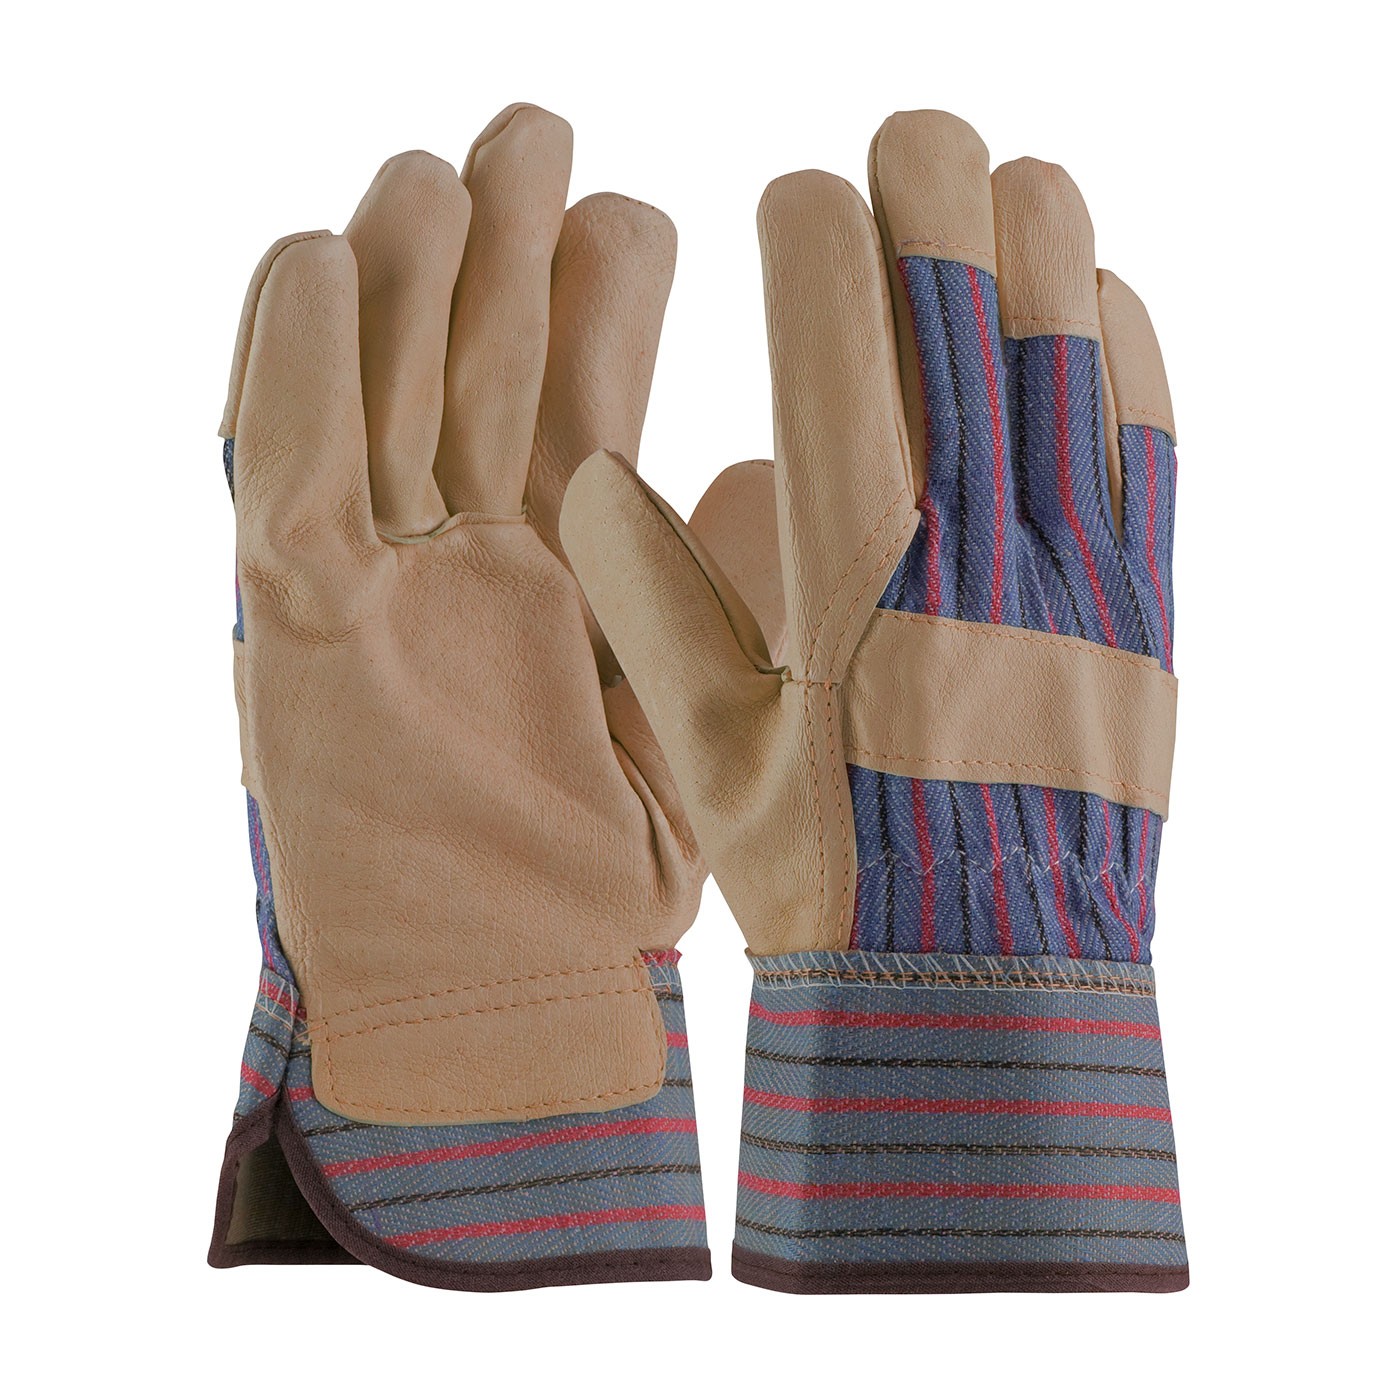 PIP® Select Grade Top Grain Pigskin Leather Palm Glove with Fabric Back - Safety Cuff  (#500P)